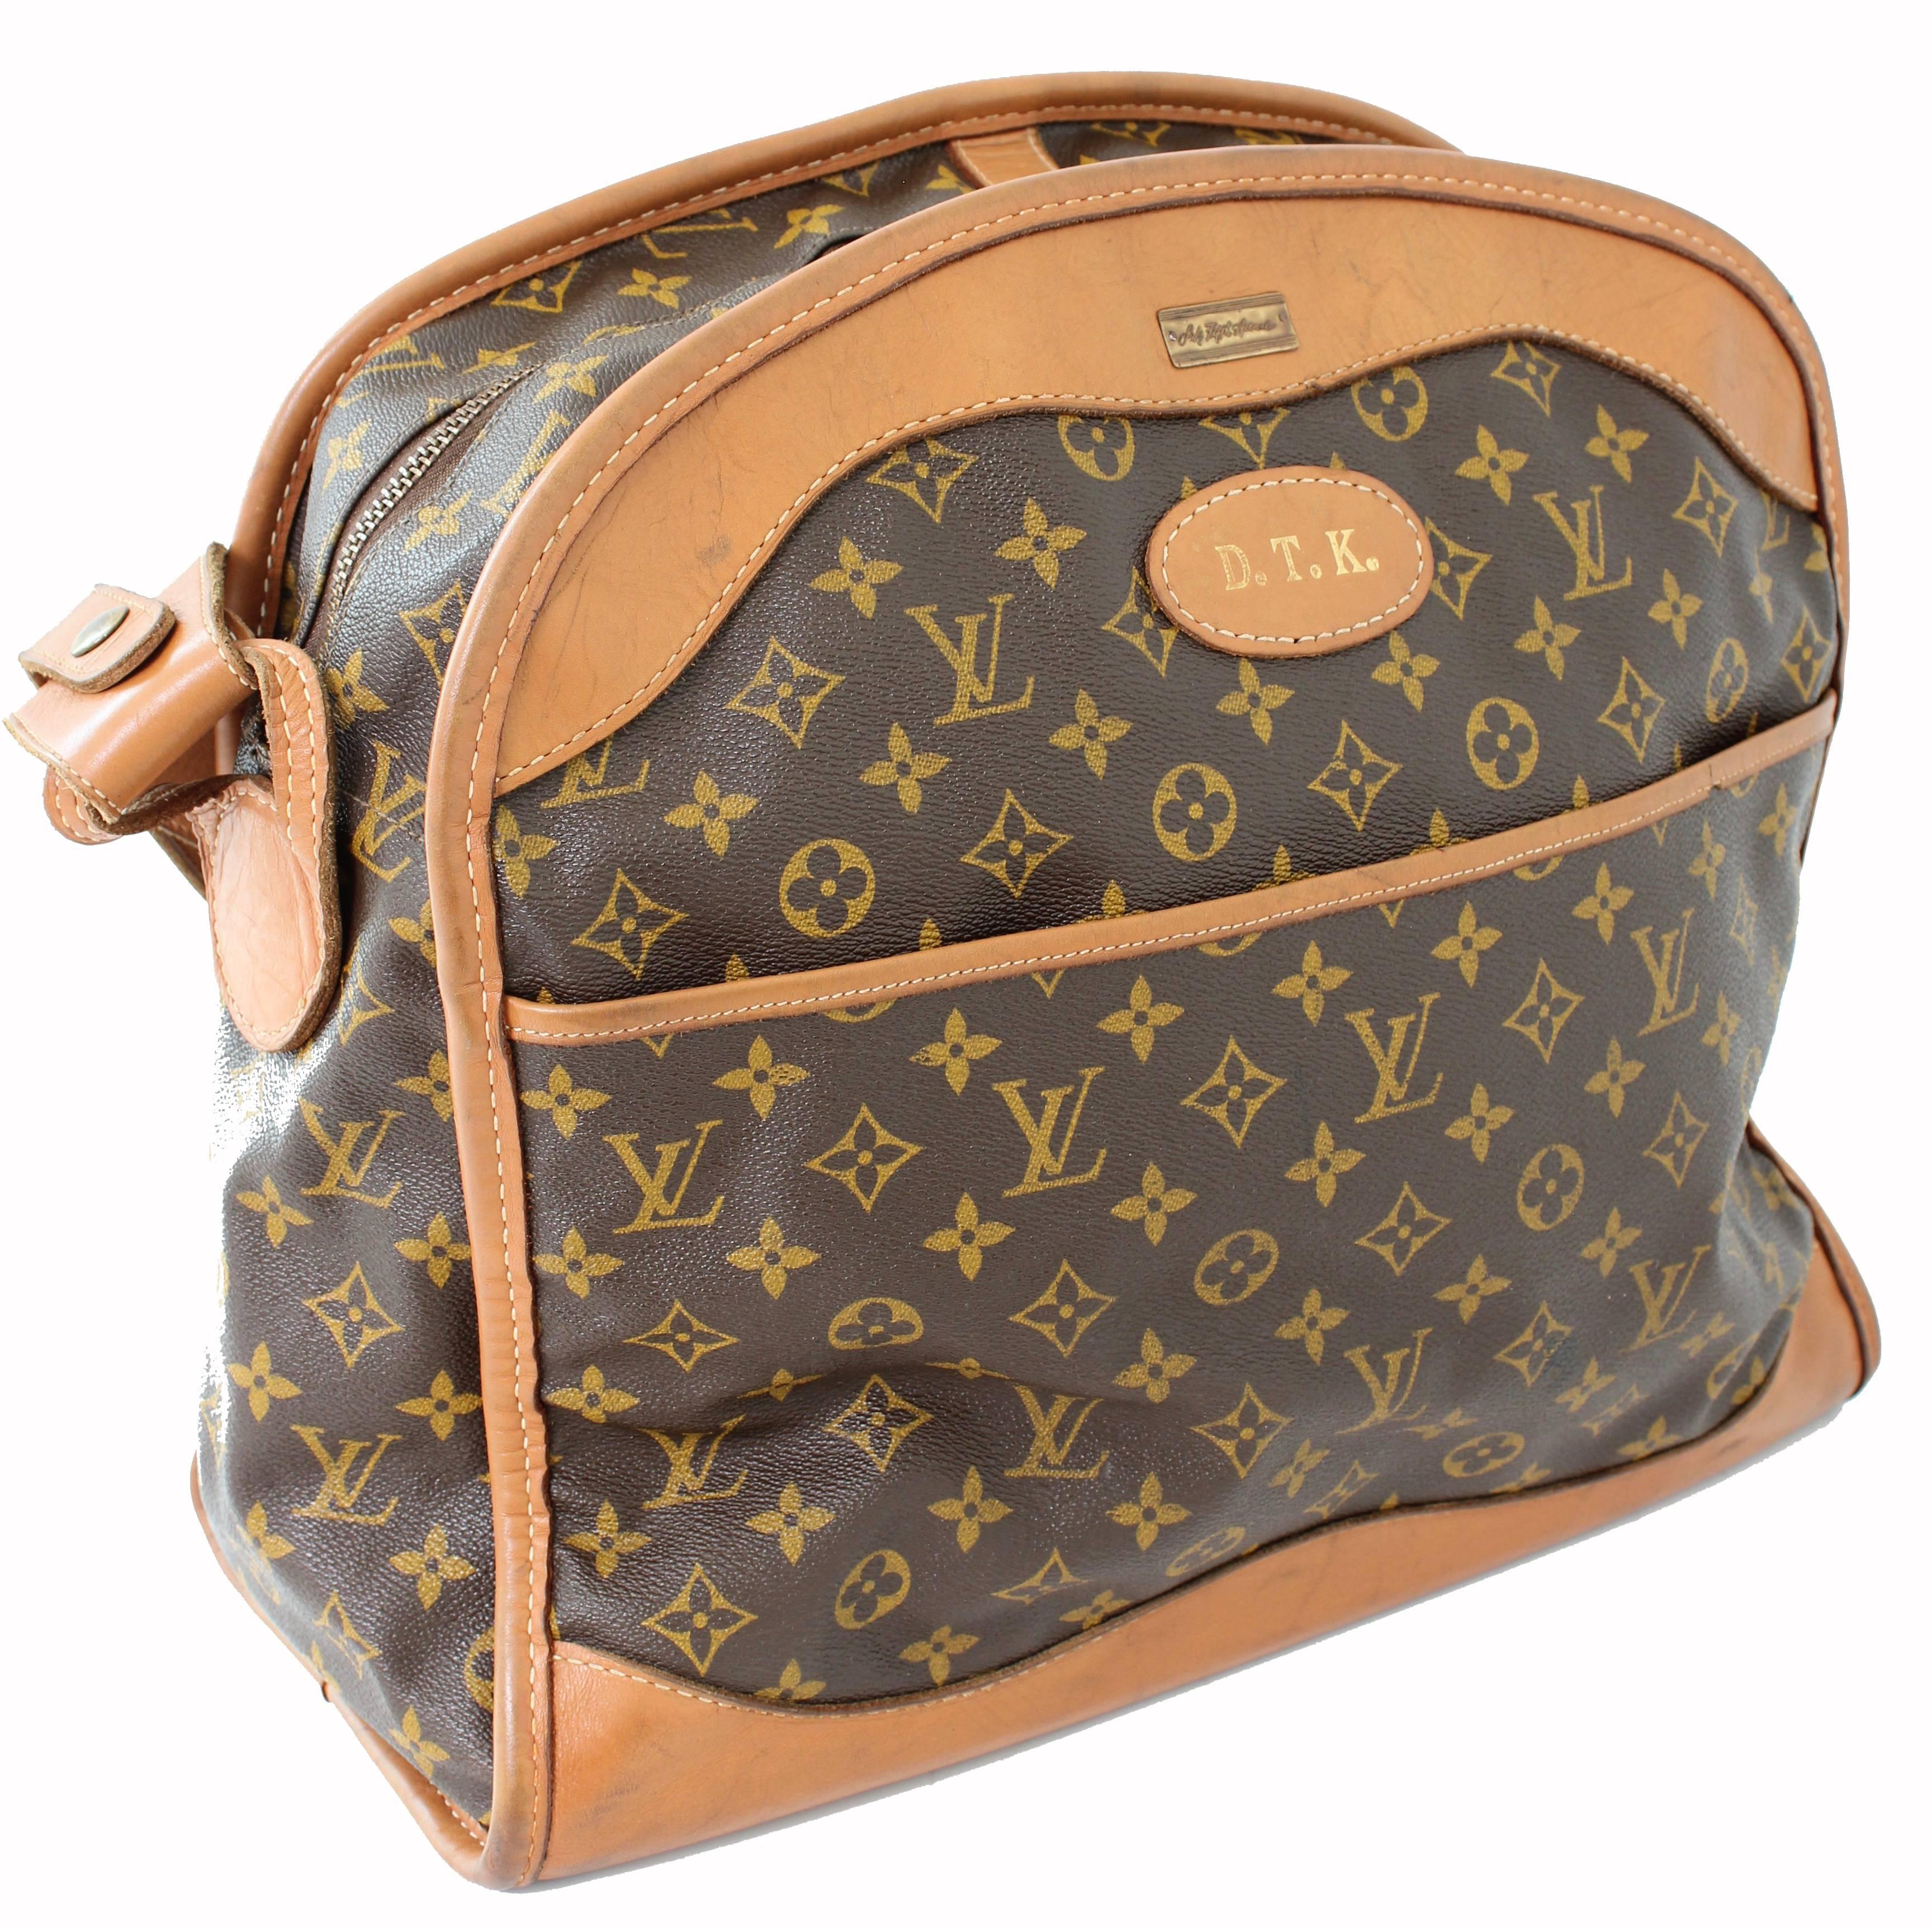 Travel in style with this Louis Vuitton carry on bag, made in the early 1970s. Made from LV's signature monogram canvas, it's trimmed in coated leather and features a flat zipper pocket on one side, an open on the other and an adjustable shoulder